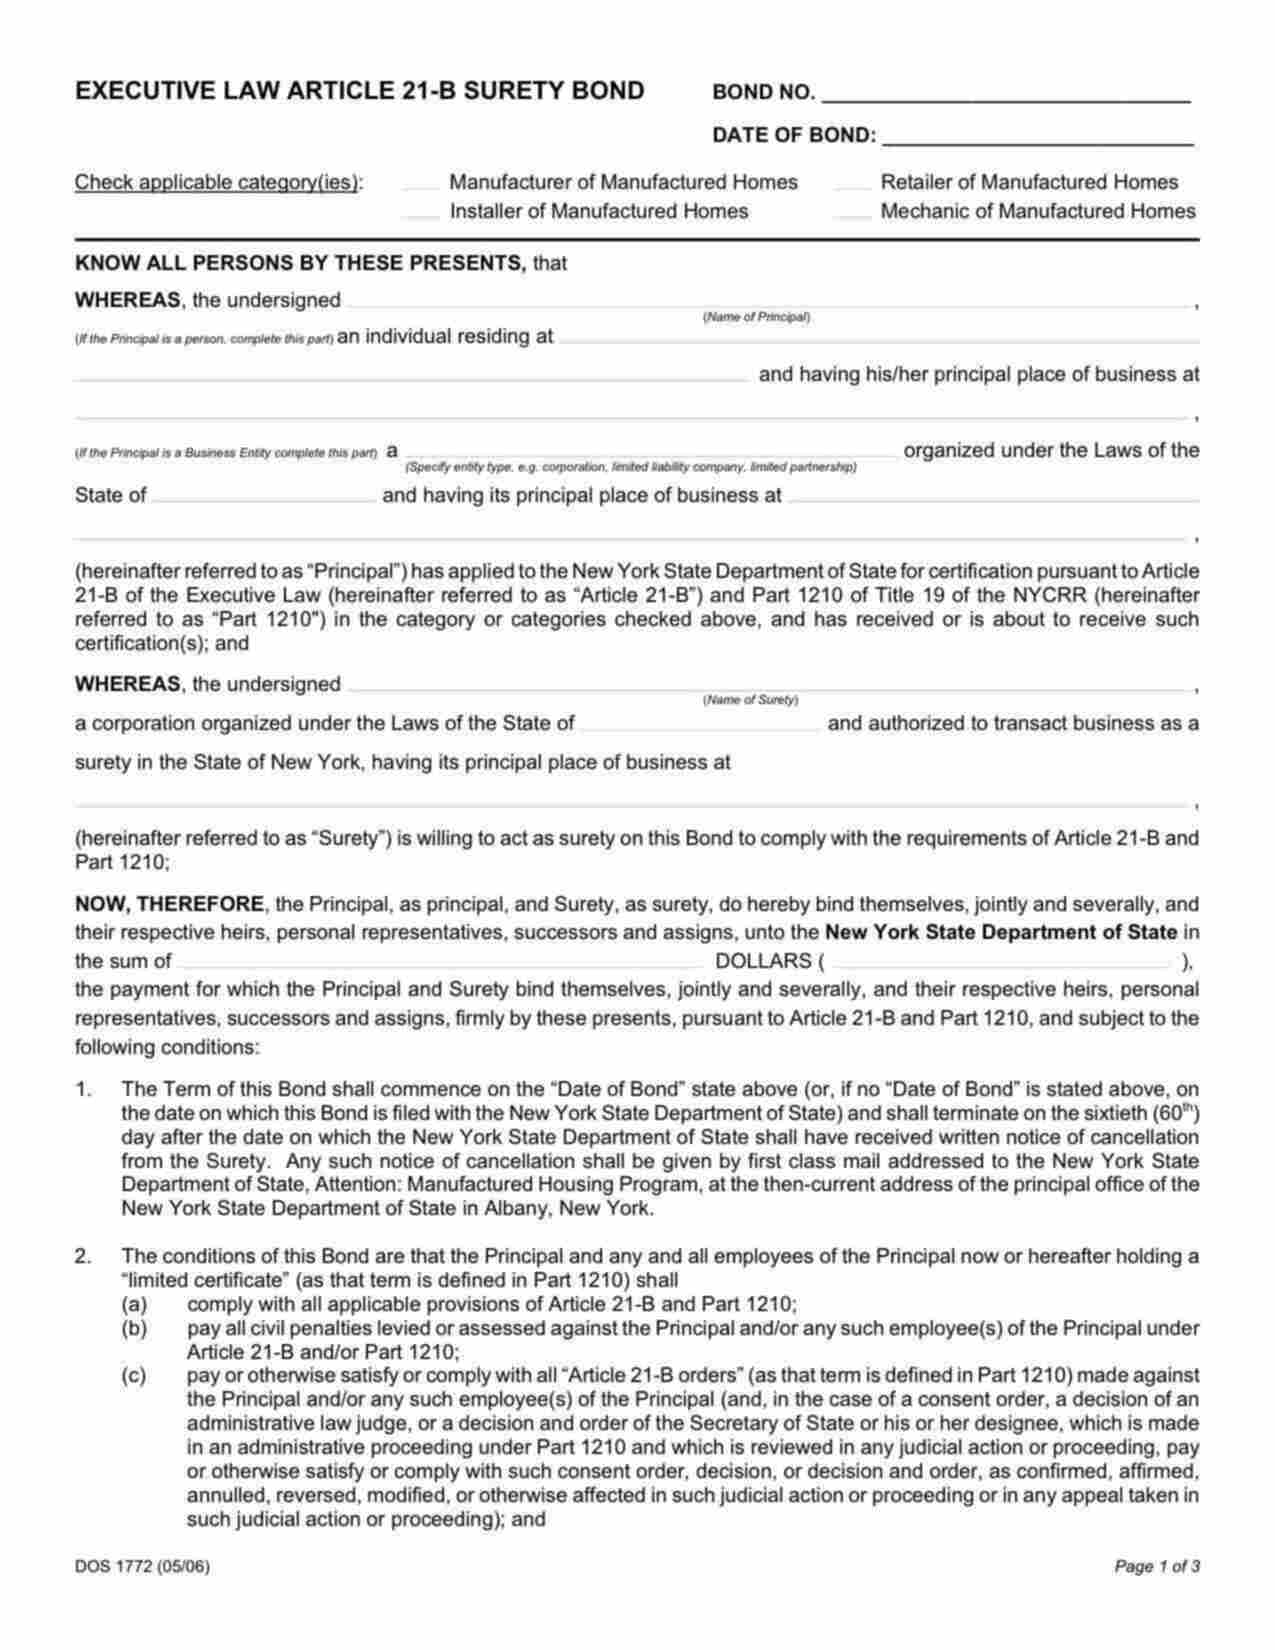 New York Retailer of Manufactured Homes - Corporation Bond Form